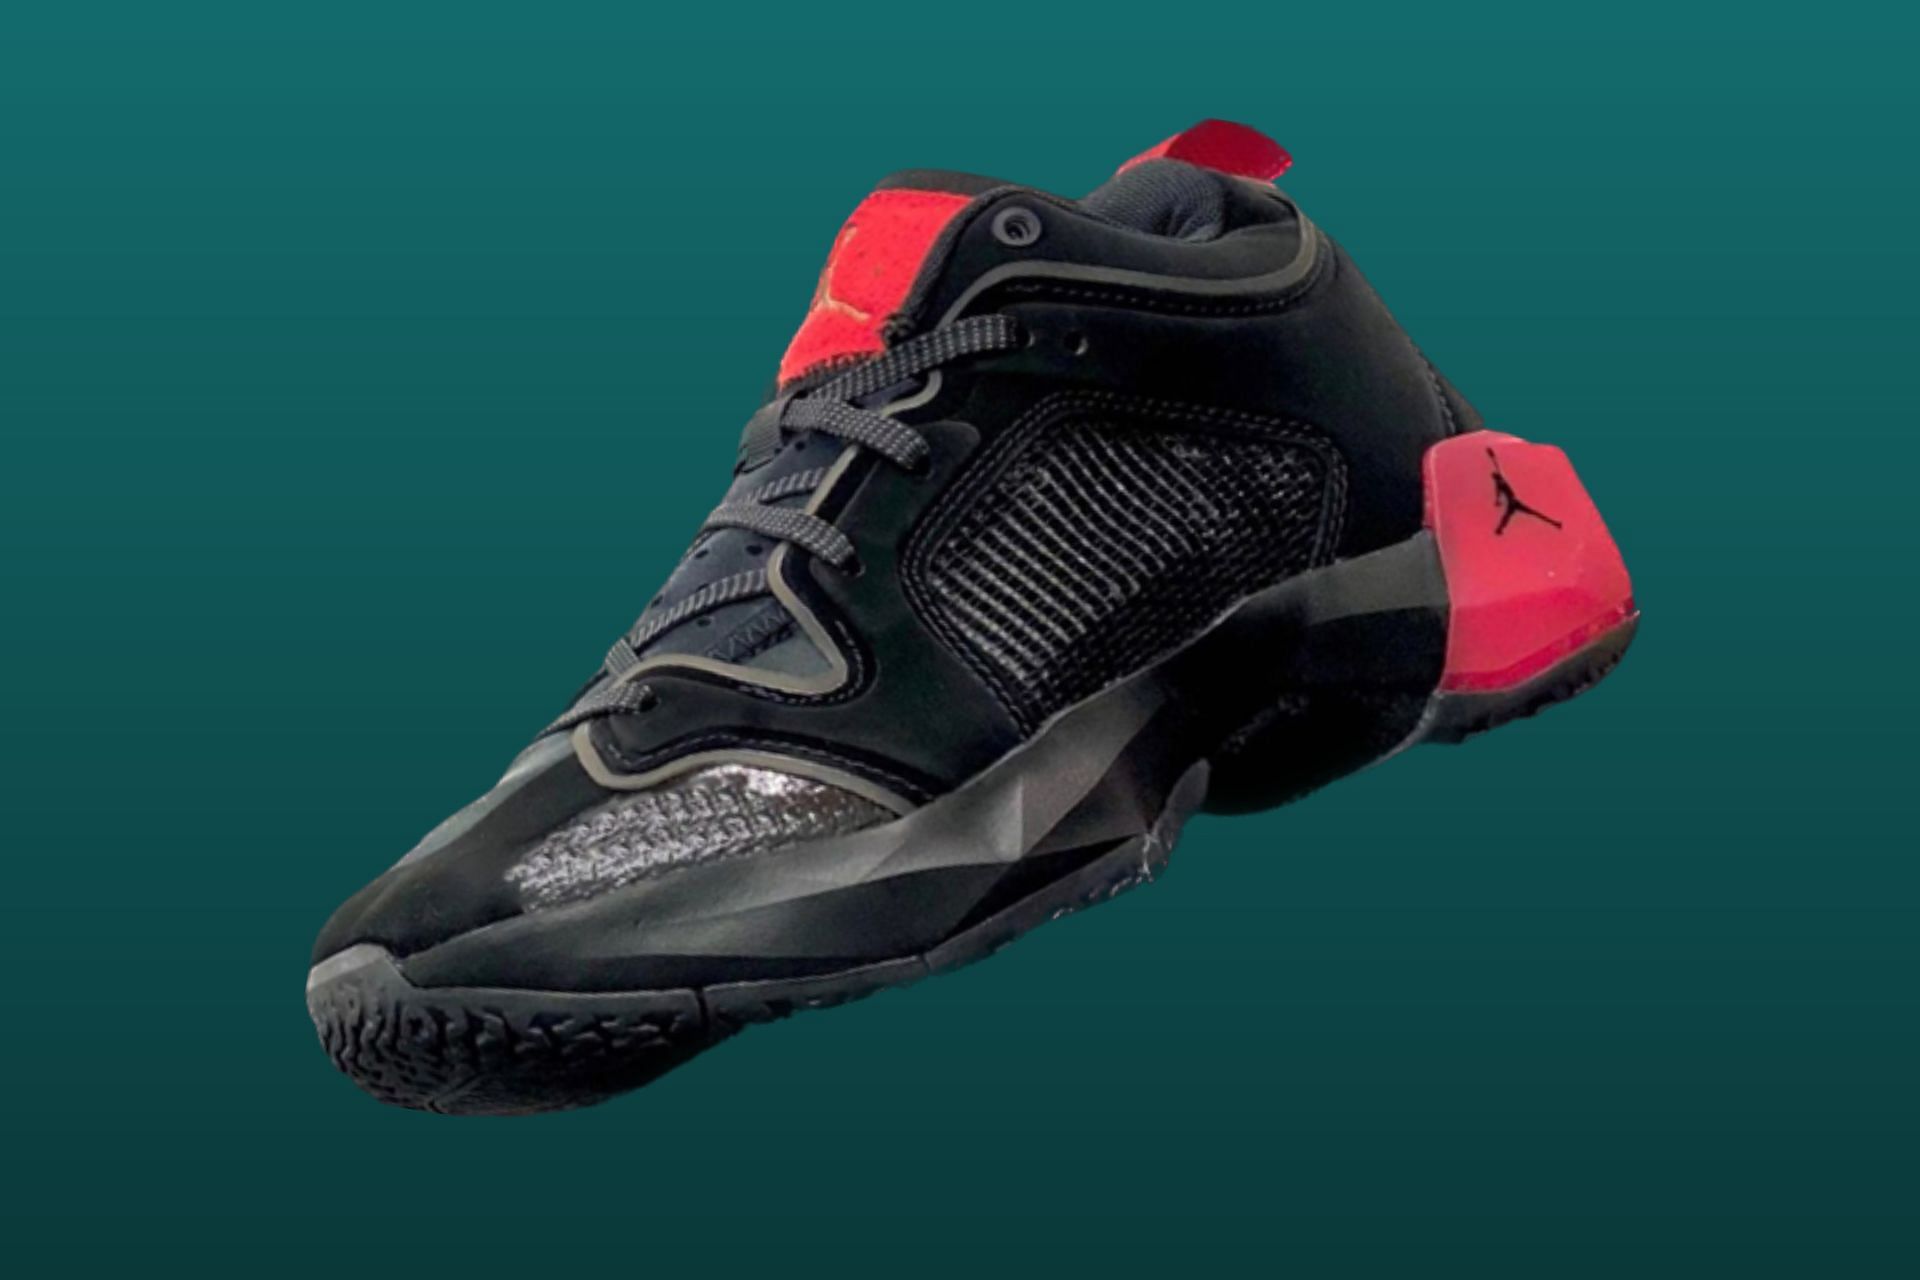 Zie insecten Mechanica Verbinding verbroken Nike: Air Jordan 37 Low “Bred” shoes: Where to buy, price, and more details  explored